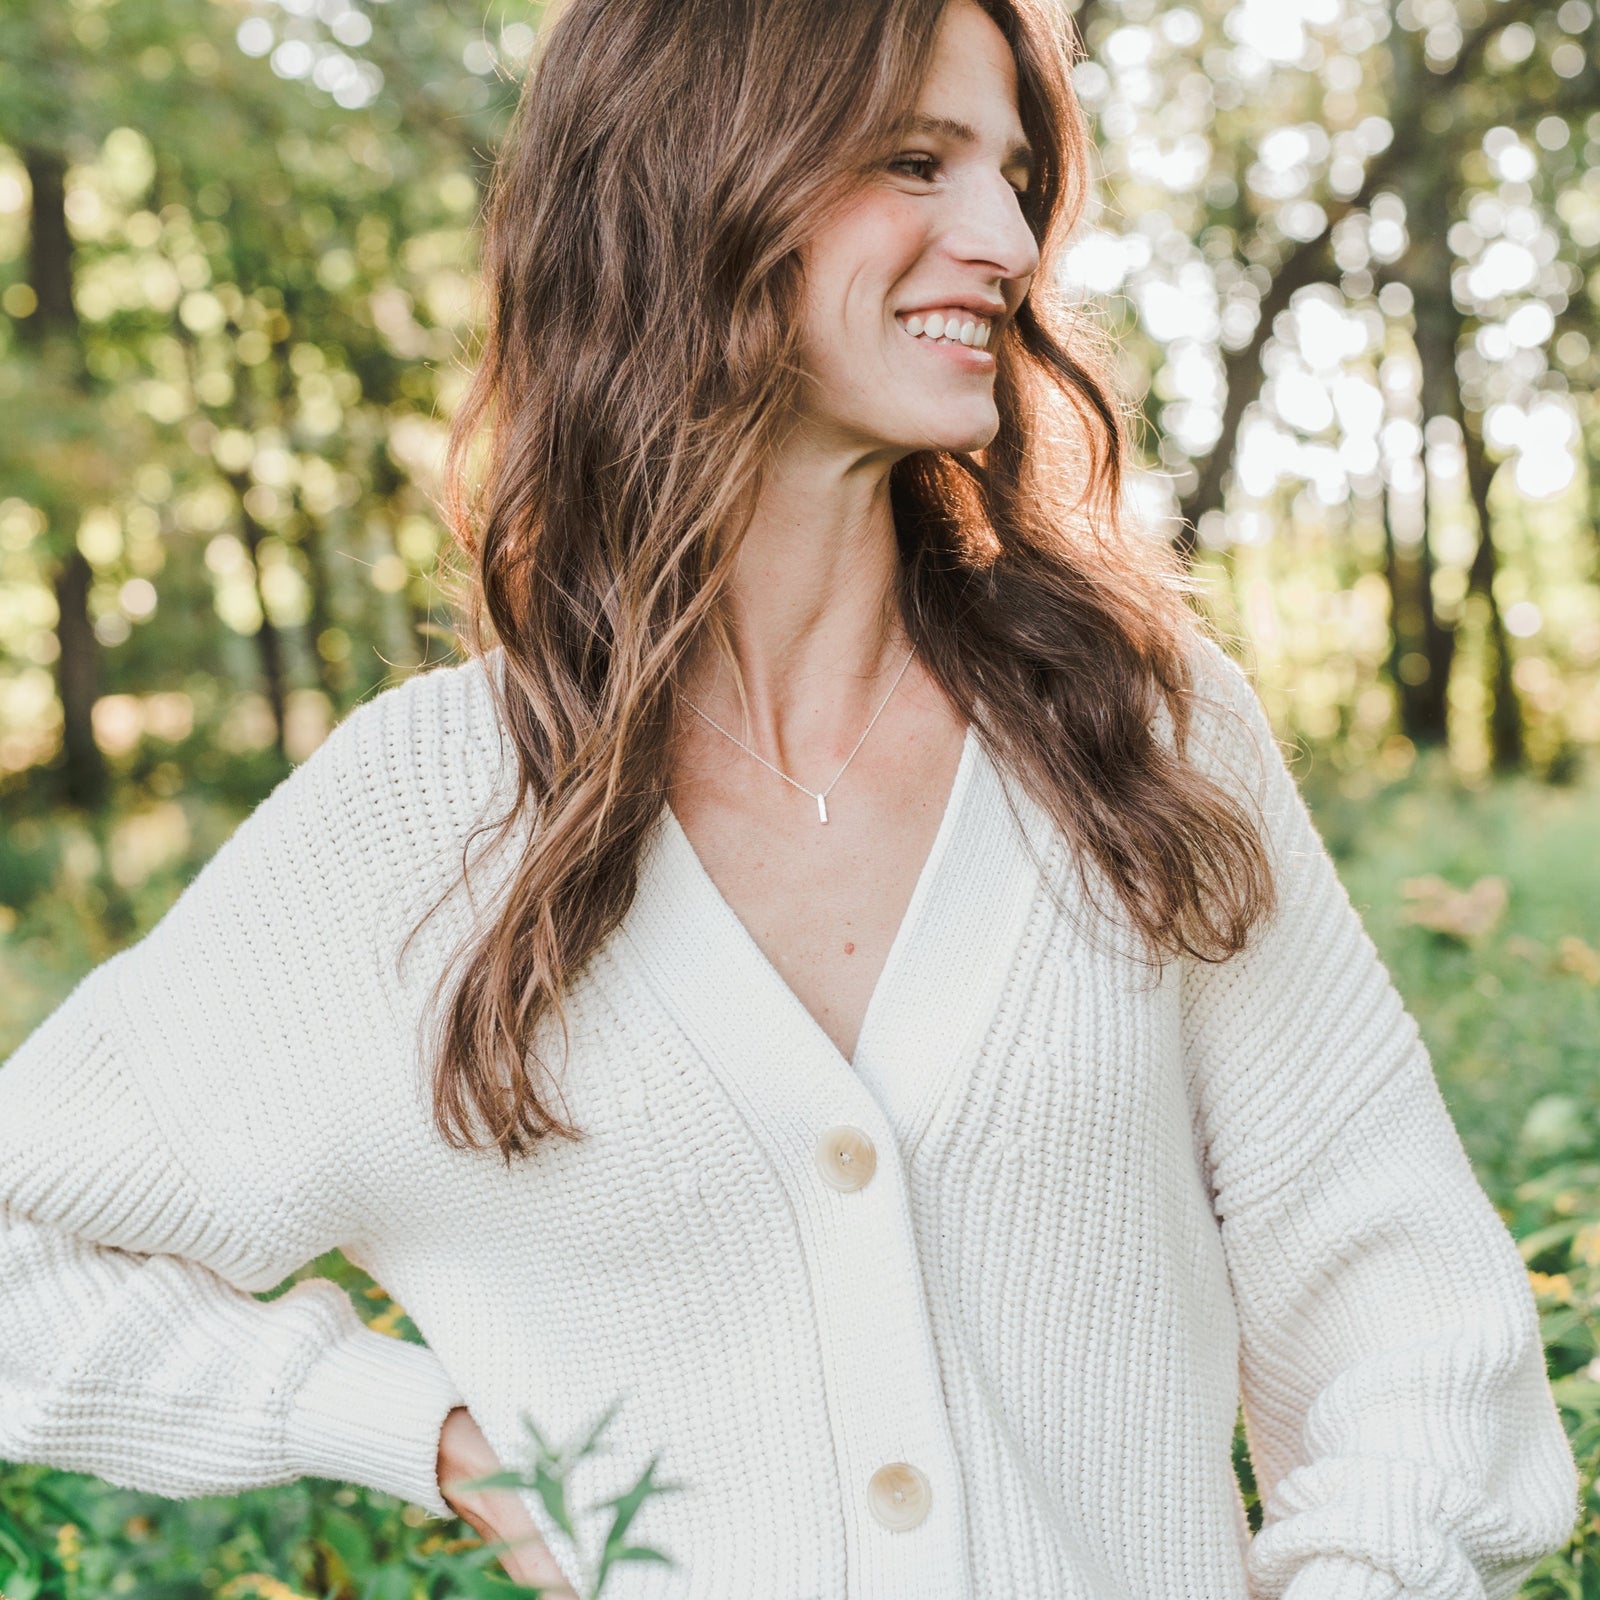 Woman smiling outdoors in a white cardigan, wearing a Becoming Jewelry sterling silver Pillar of Strength Necklace with a hammered bar drop charm.